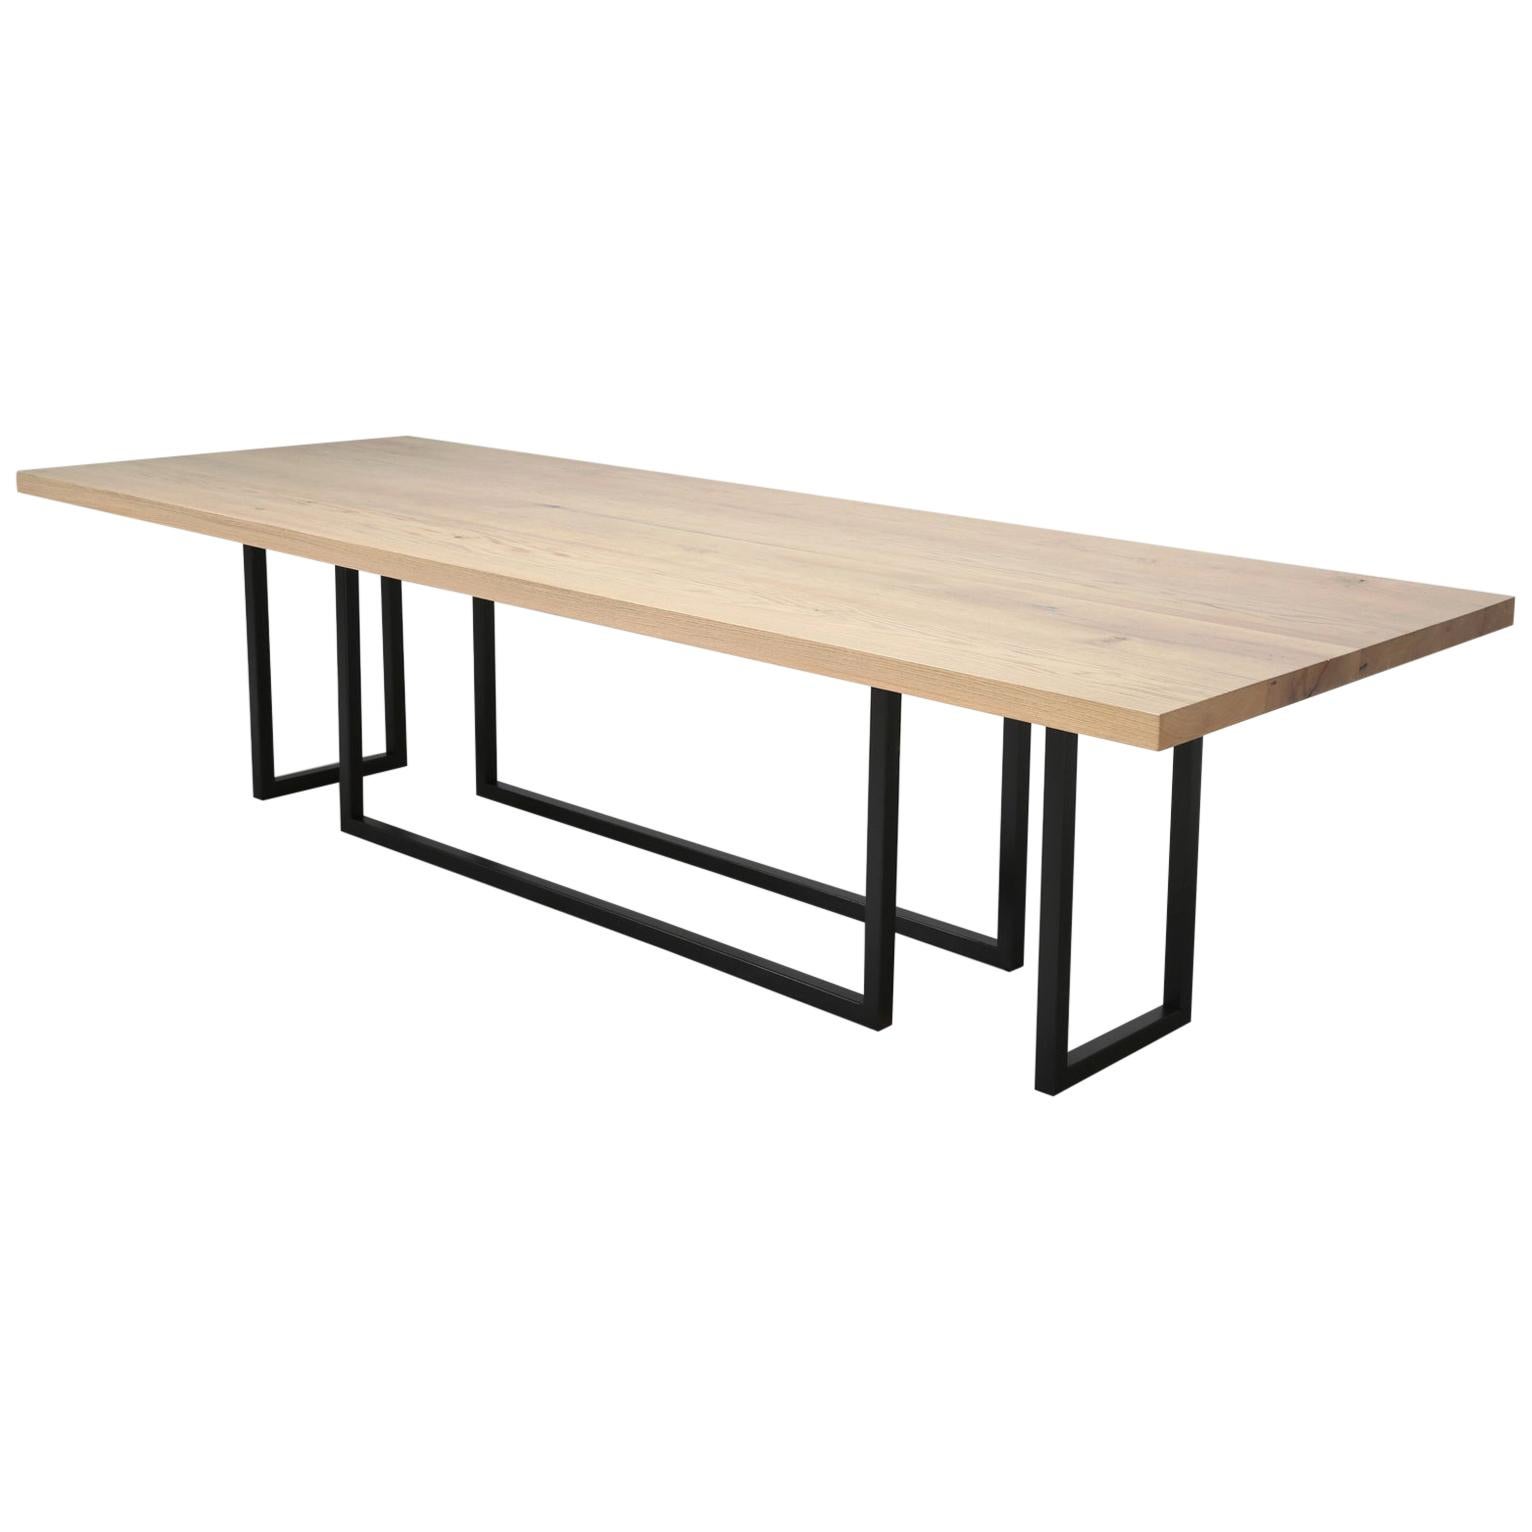 Mid-Century Modern Inspired Steel and Reclaimed White Oak Dining Table